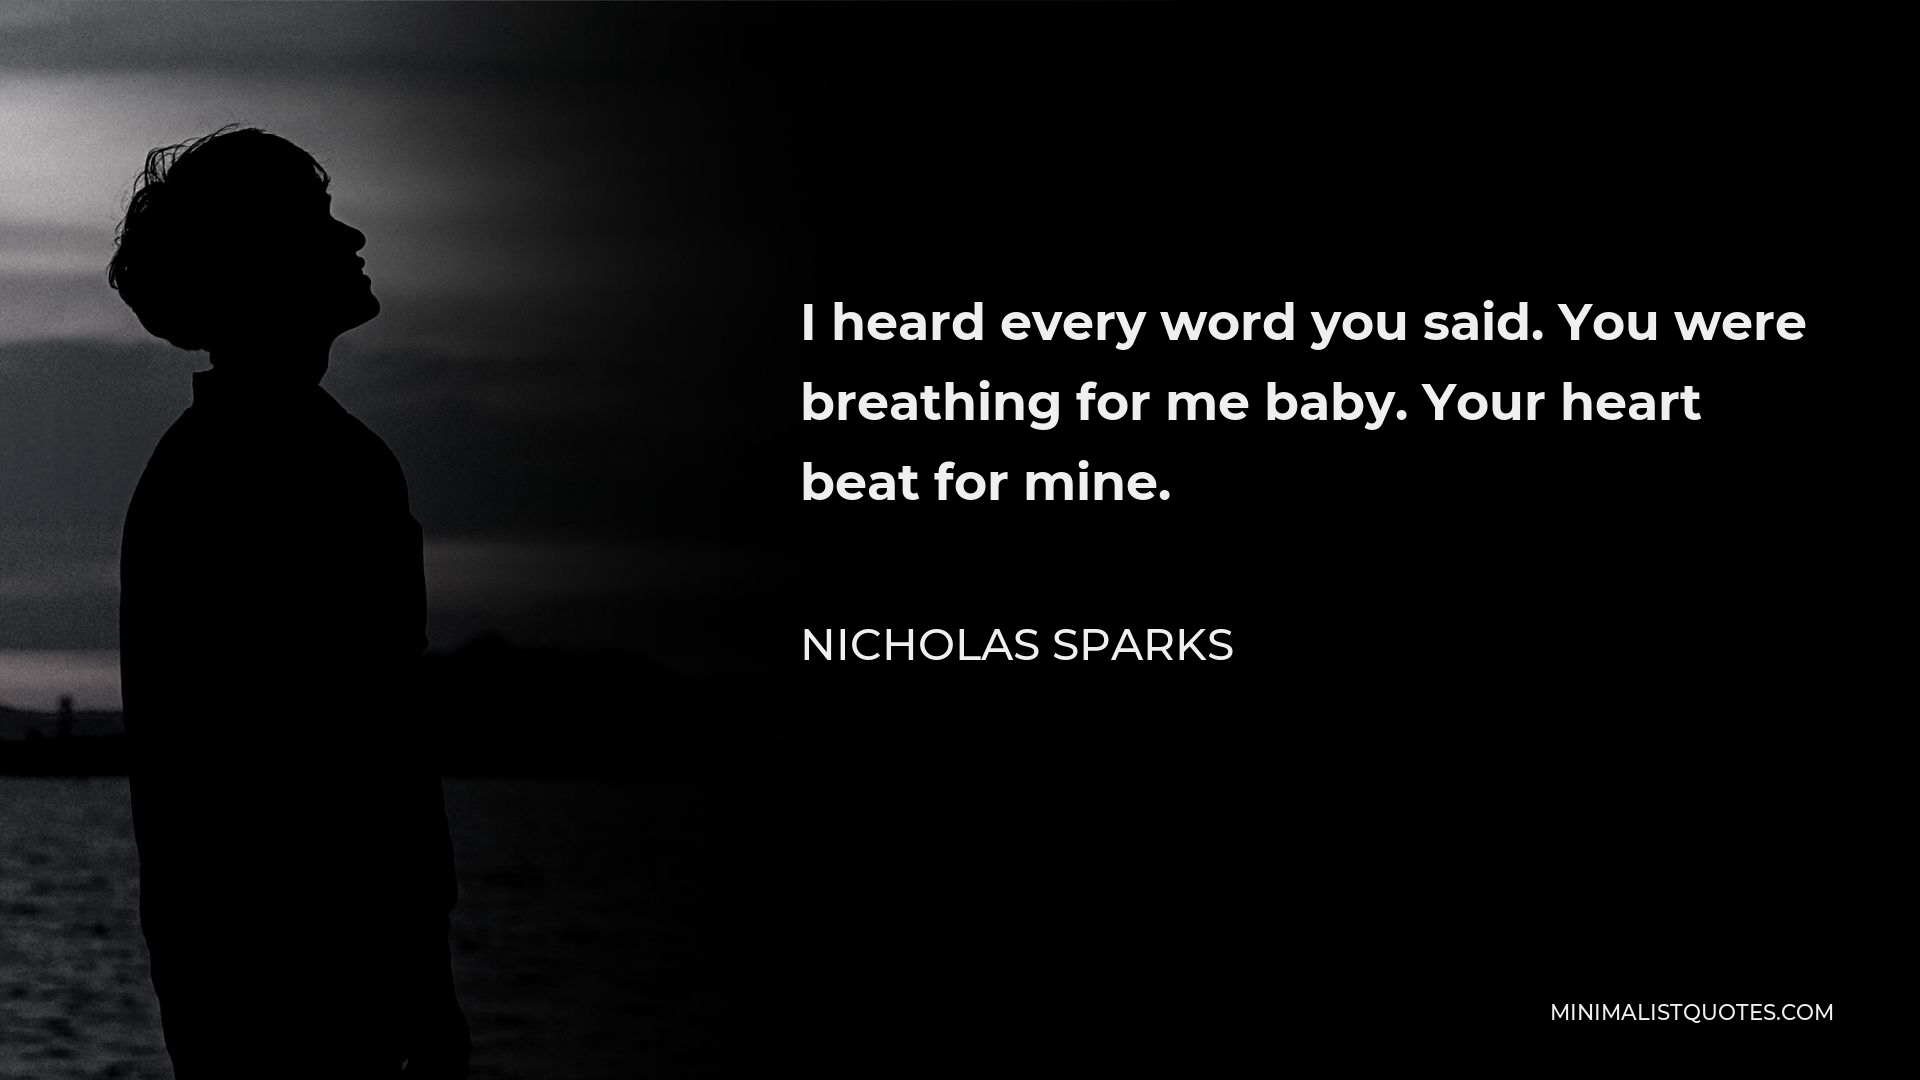 Nicholas Sparks Quote - I heard every word you said. You were breathing for me baby. Your heart beat for mine.